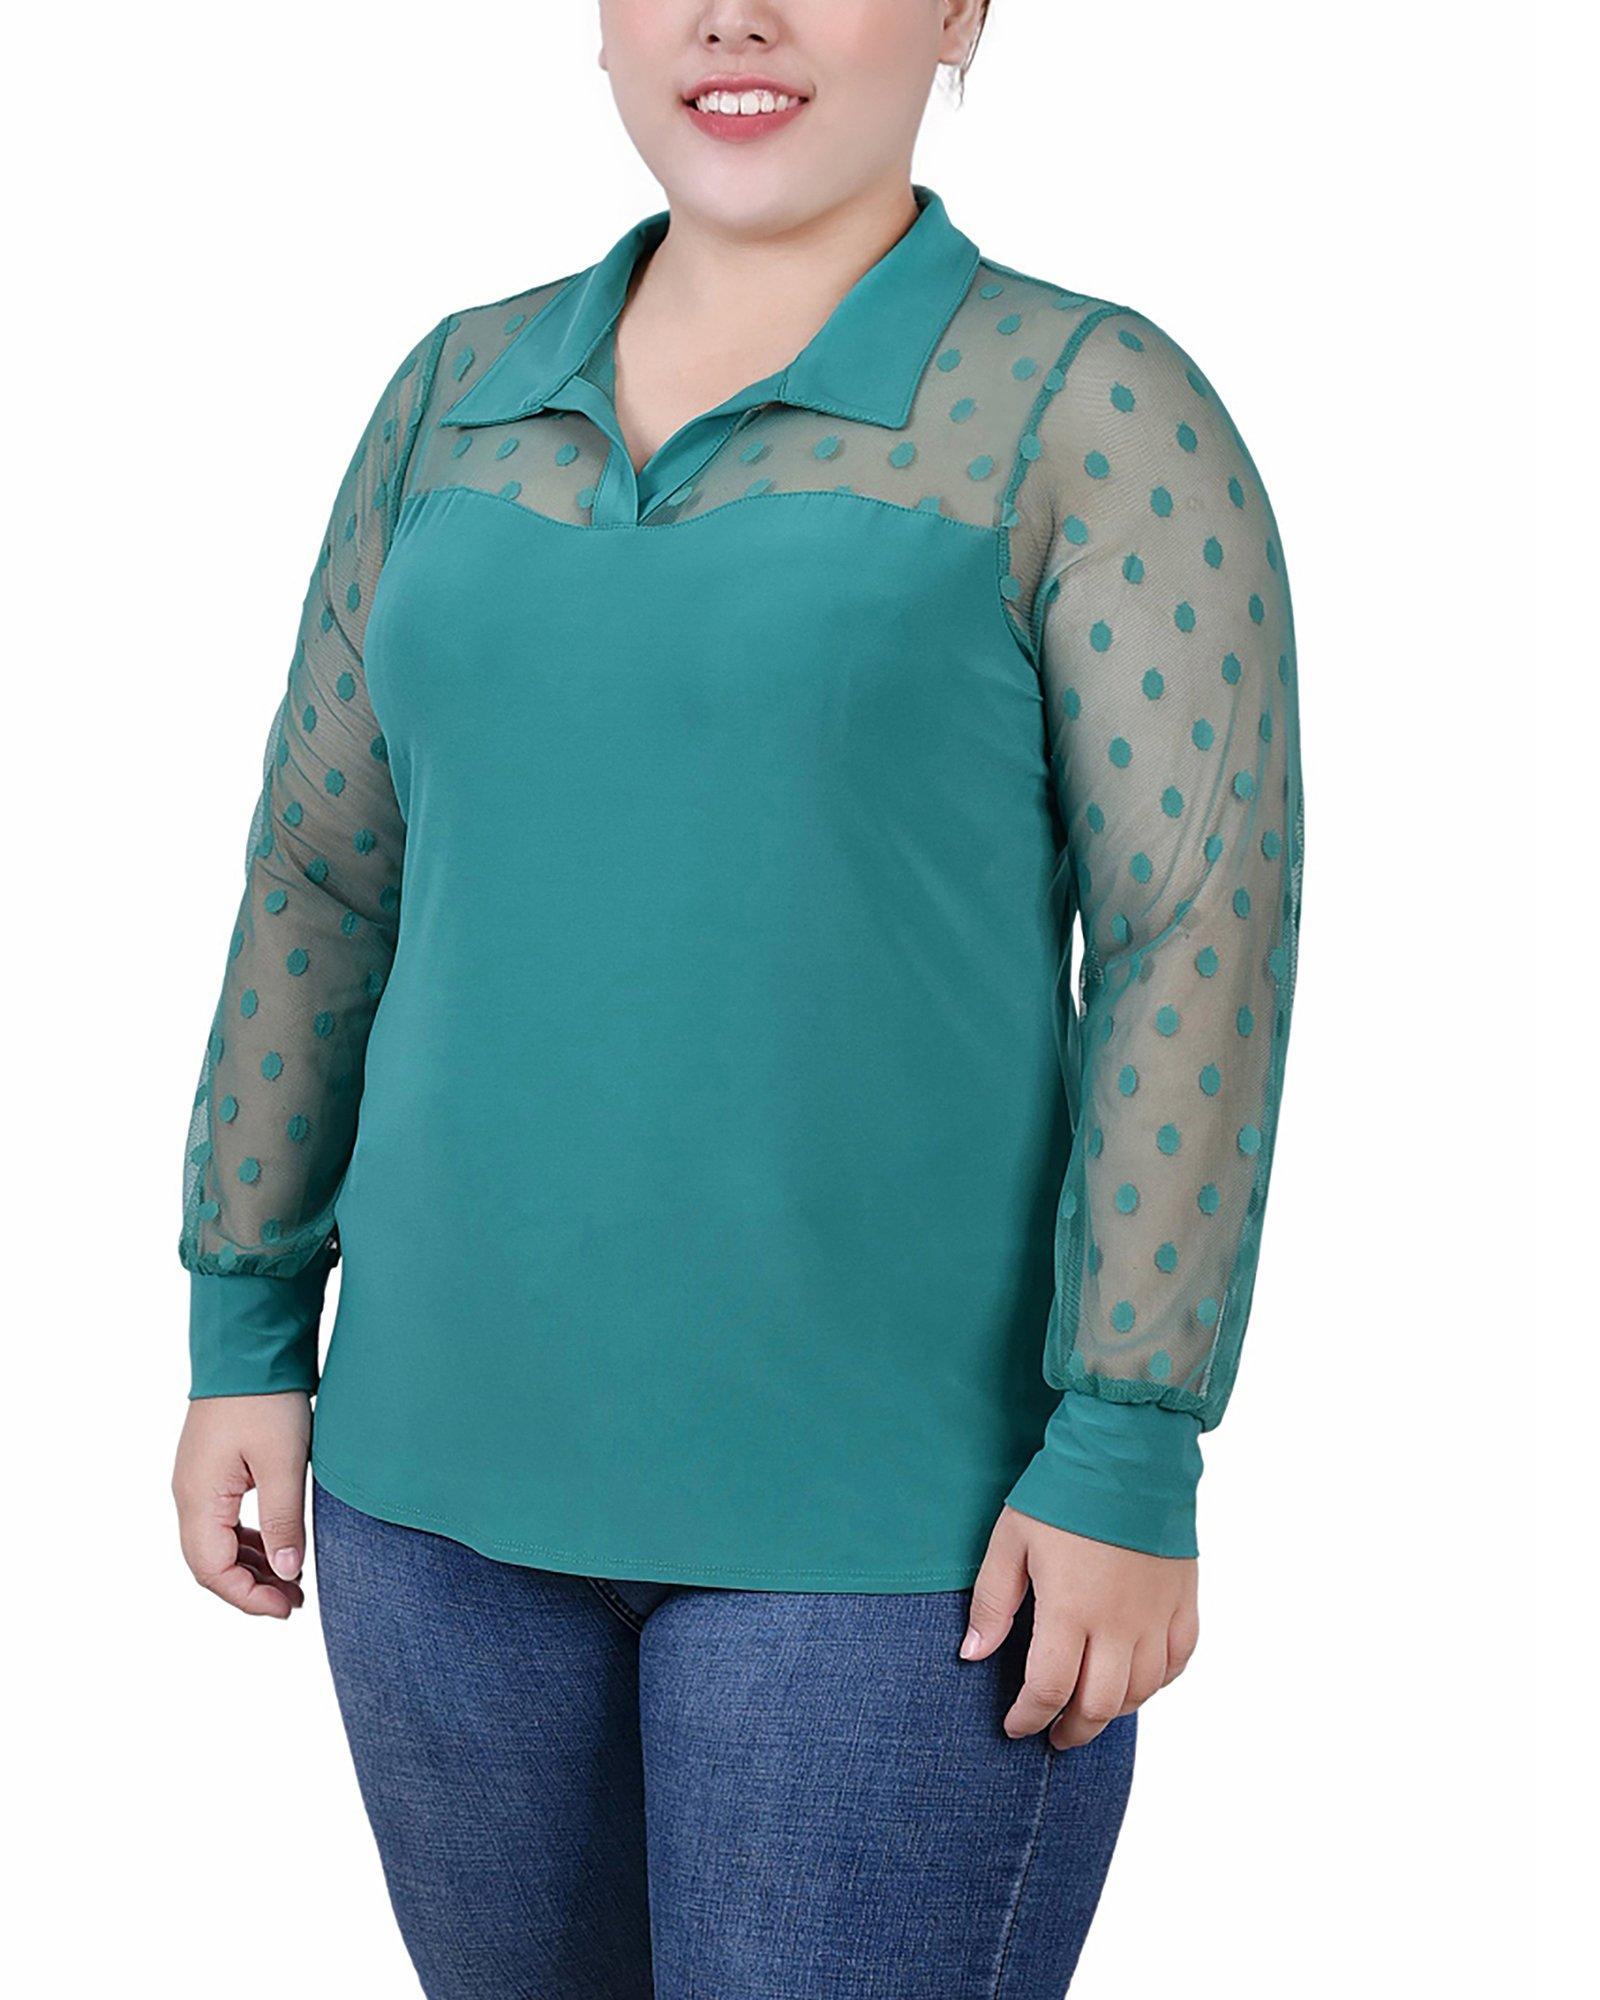 NY Collection Womens Plus Size Mesh Sleeve Top